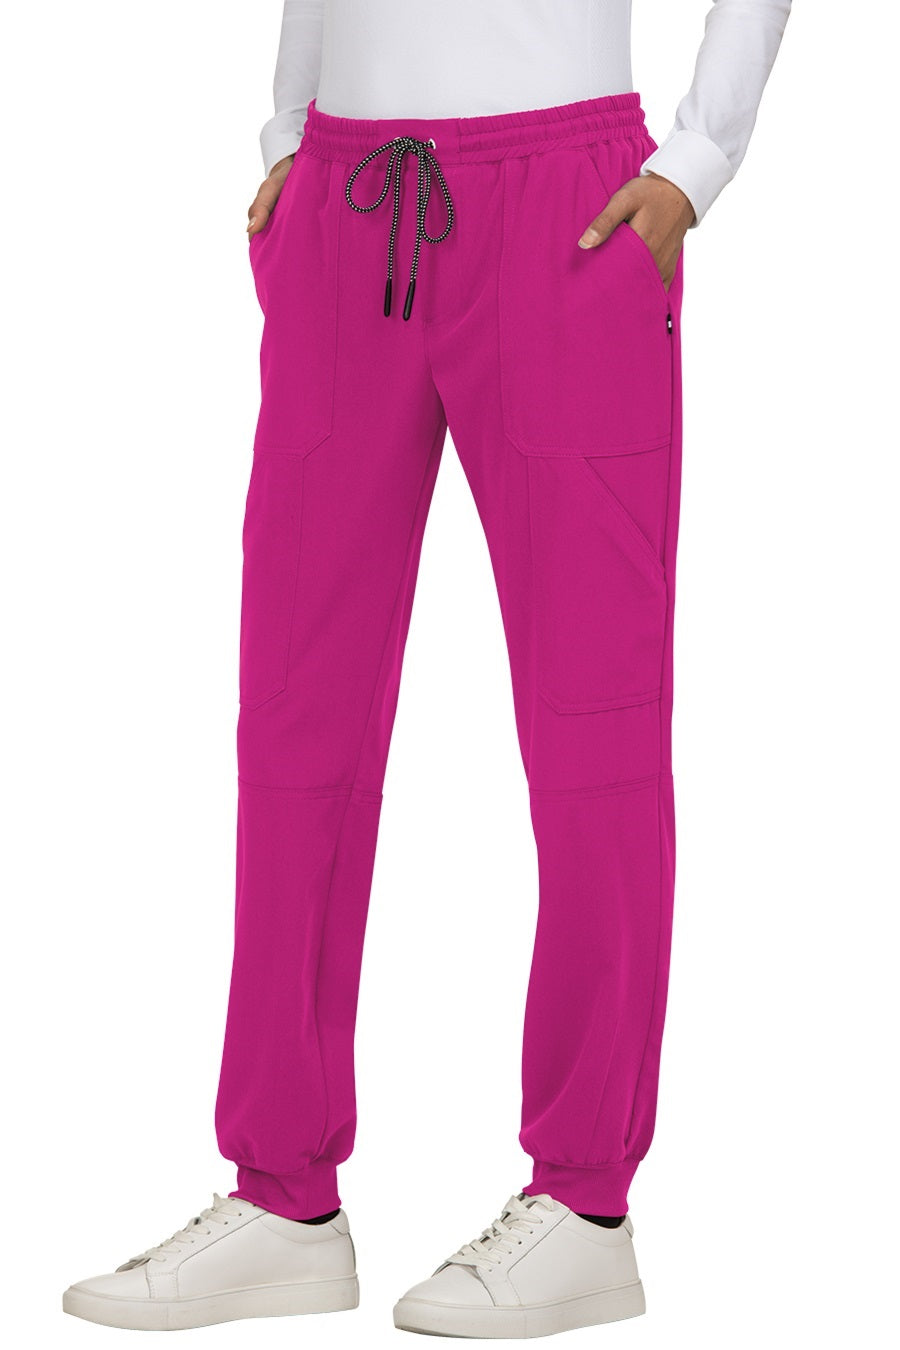 Koi Next Gen Good Vibe Jogger Pant Petite in Azalea Pink at Parker's Clothing and Shoes.